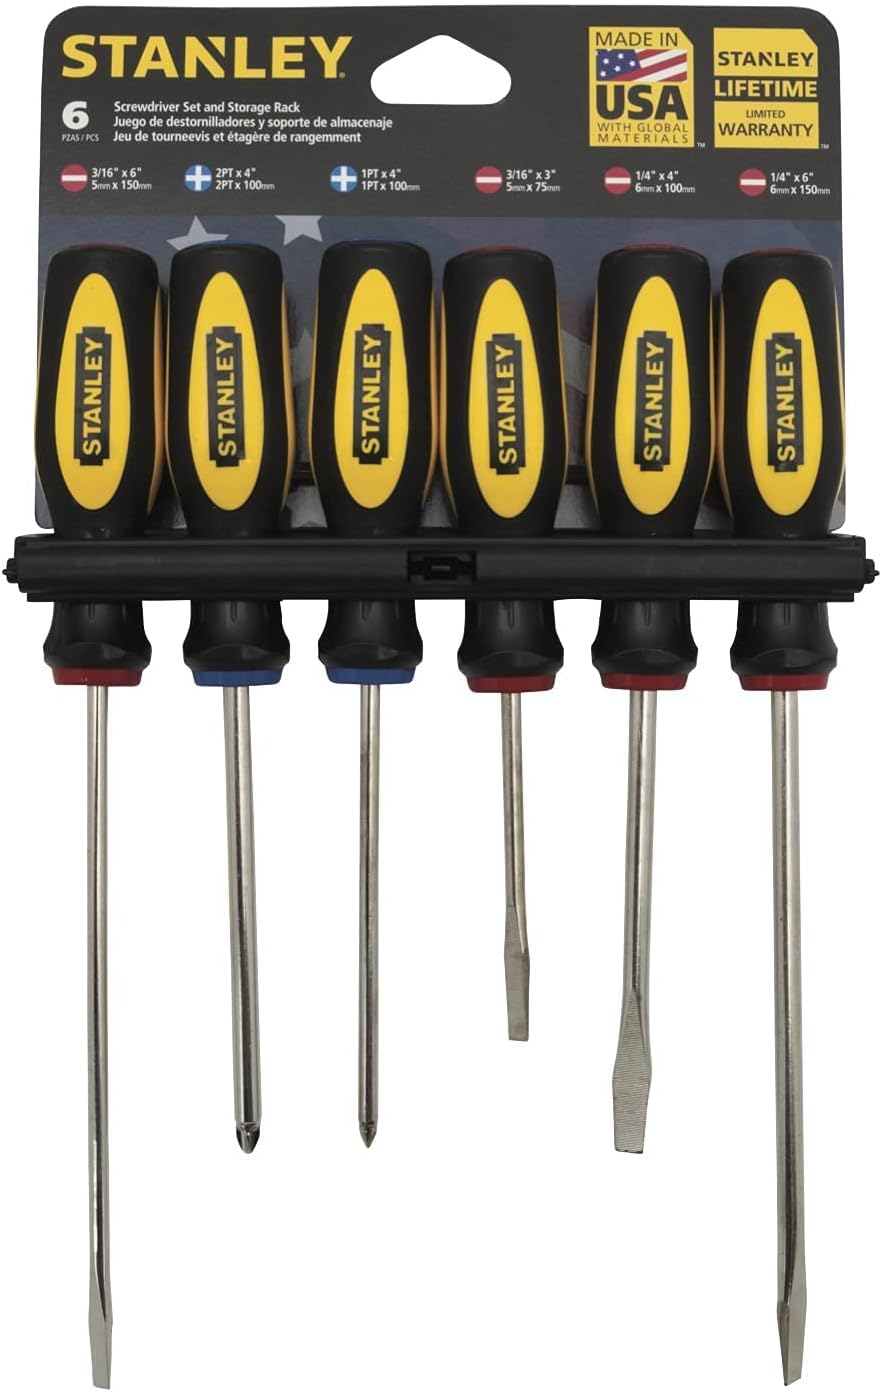 Stanley 6 Pieces Screw Driver Set - 60-060S | Supply Master, Accra, Ghana Level Buy Tools hardware Building materials